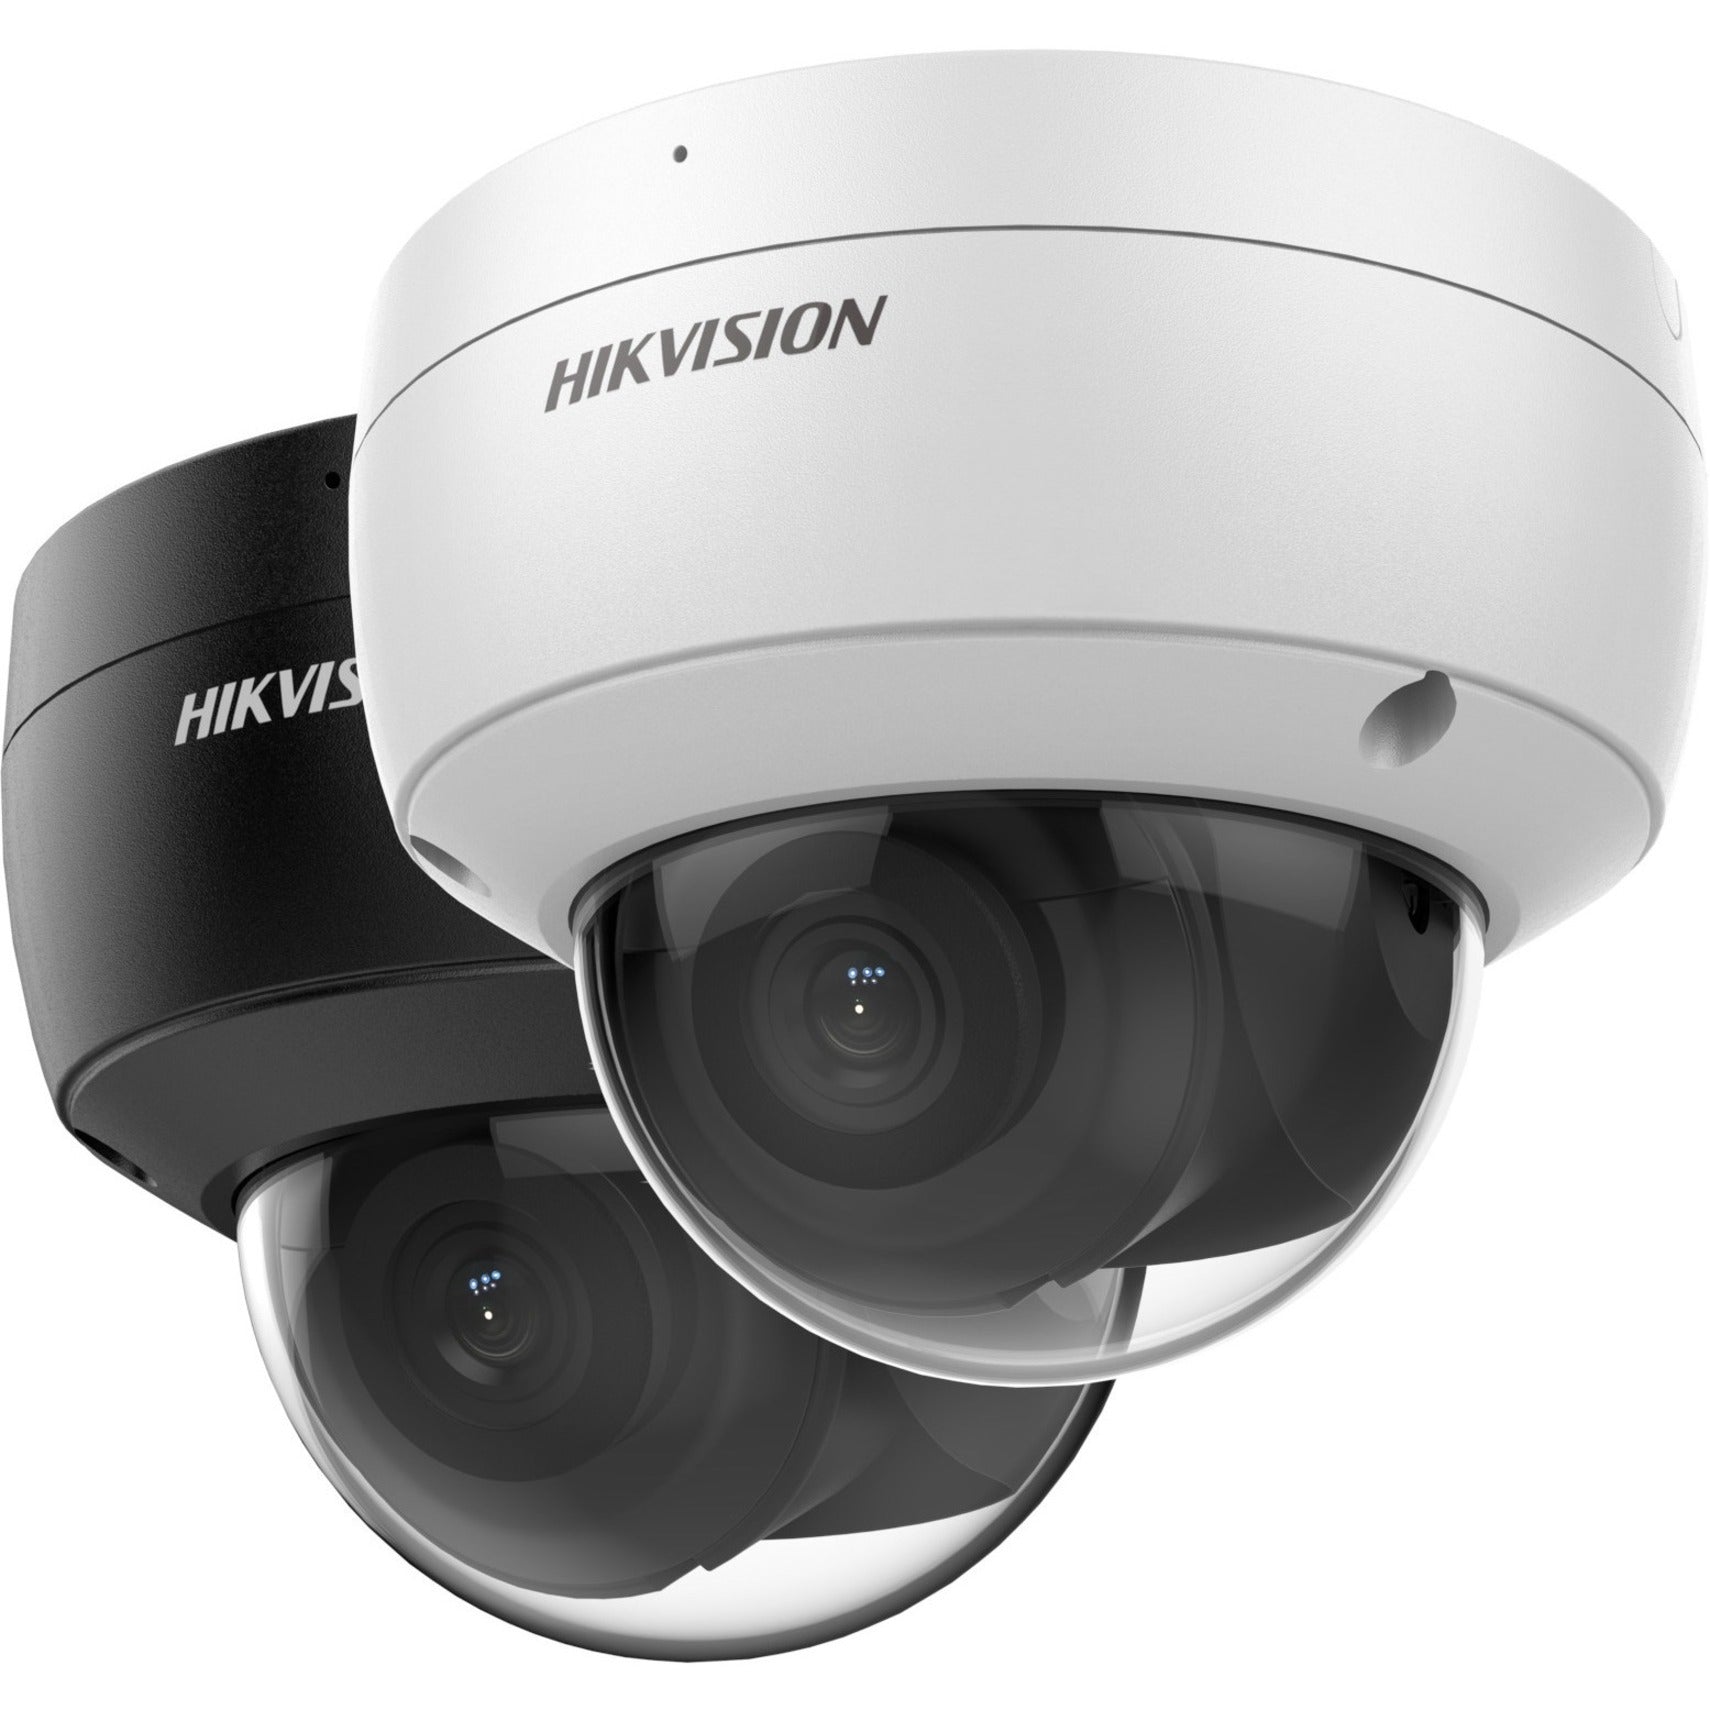 Hikvision DS-2CD2143G2-IU 2.8MM(BLACK) 4 MP AcuSense Fixed Dome Network Camera, Black, Motion Detection, SD Card Local Storage